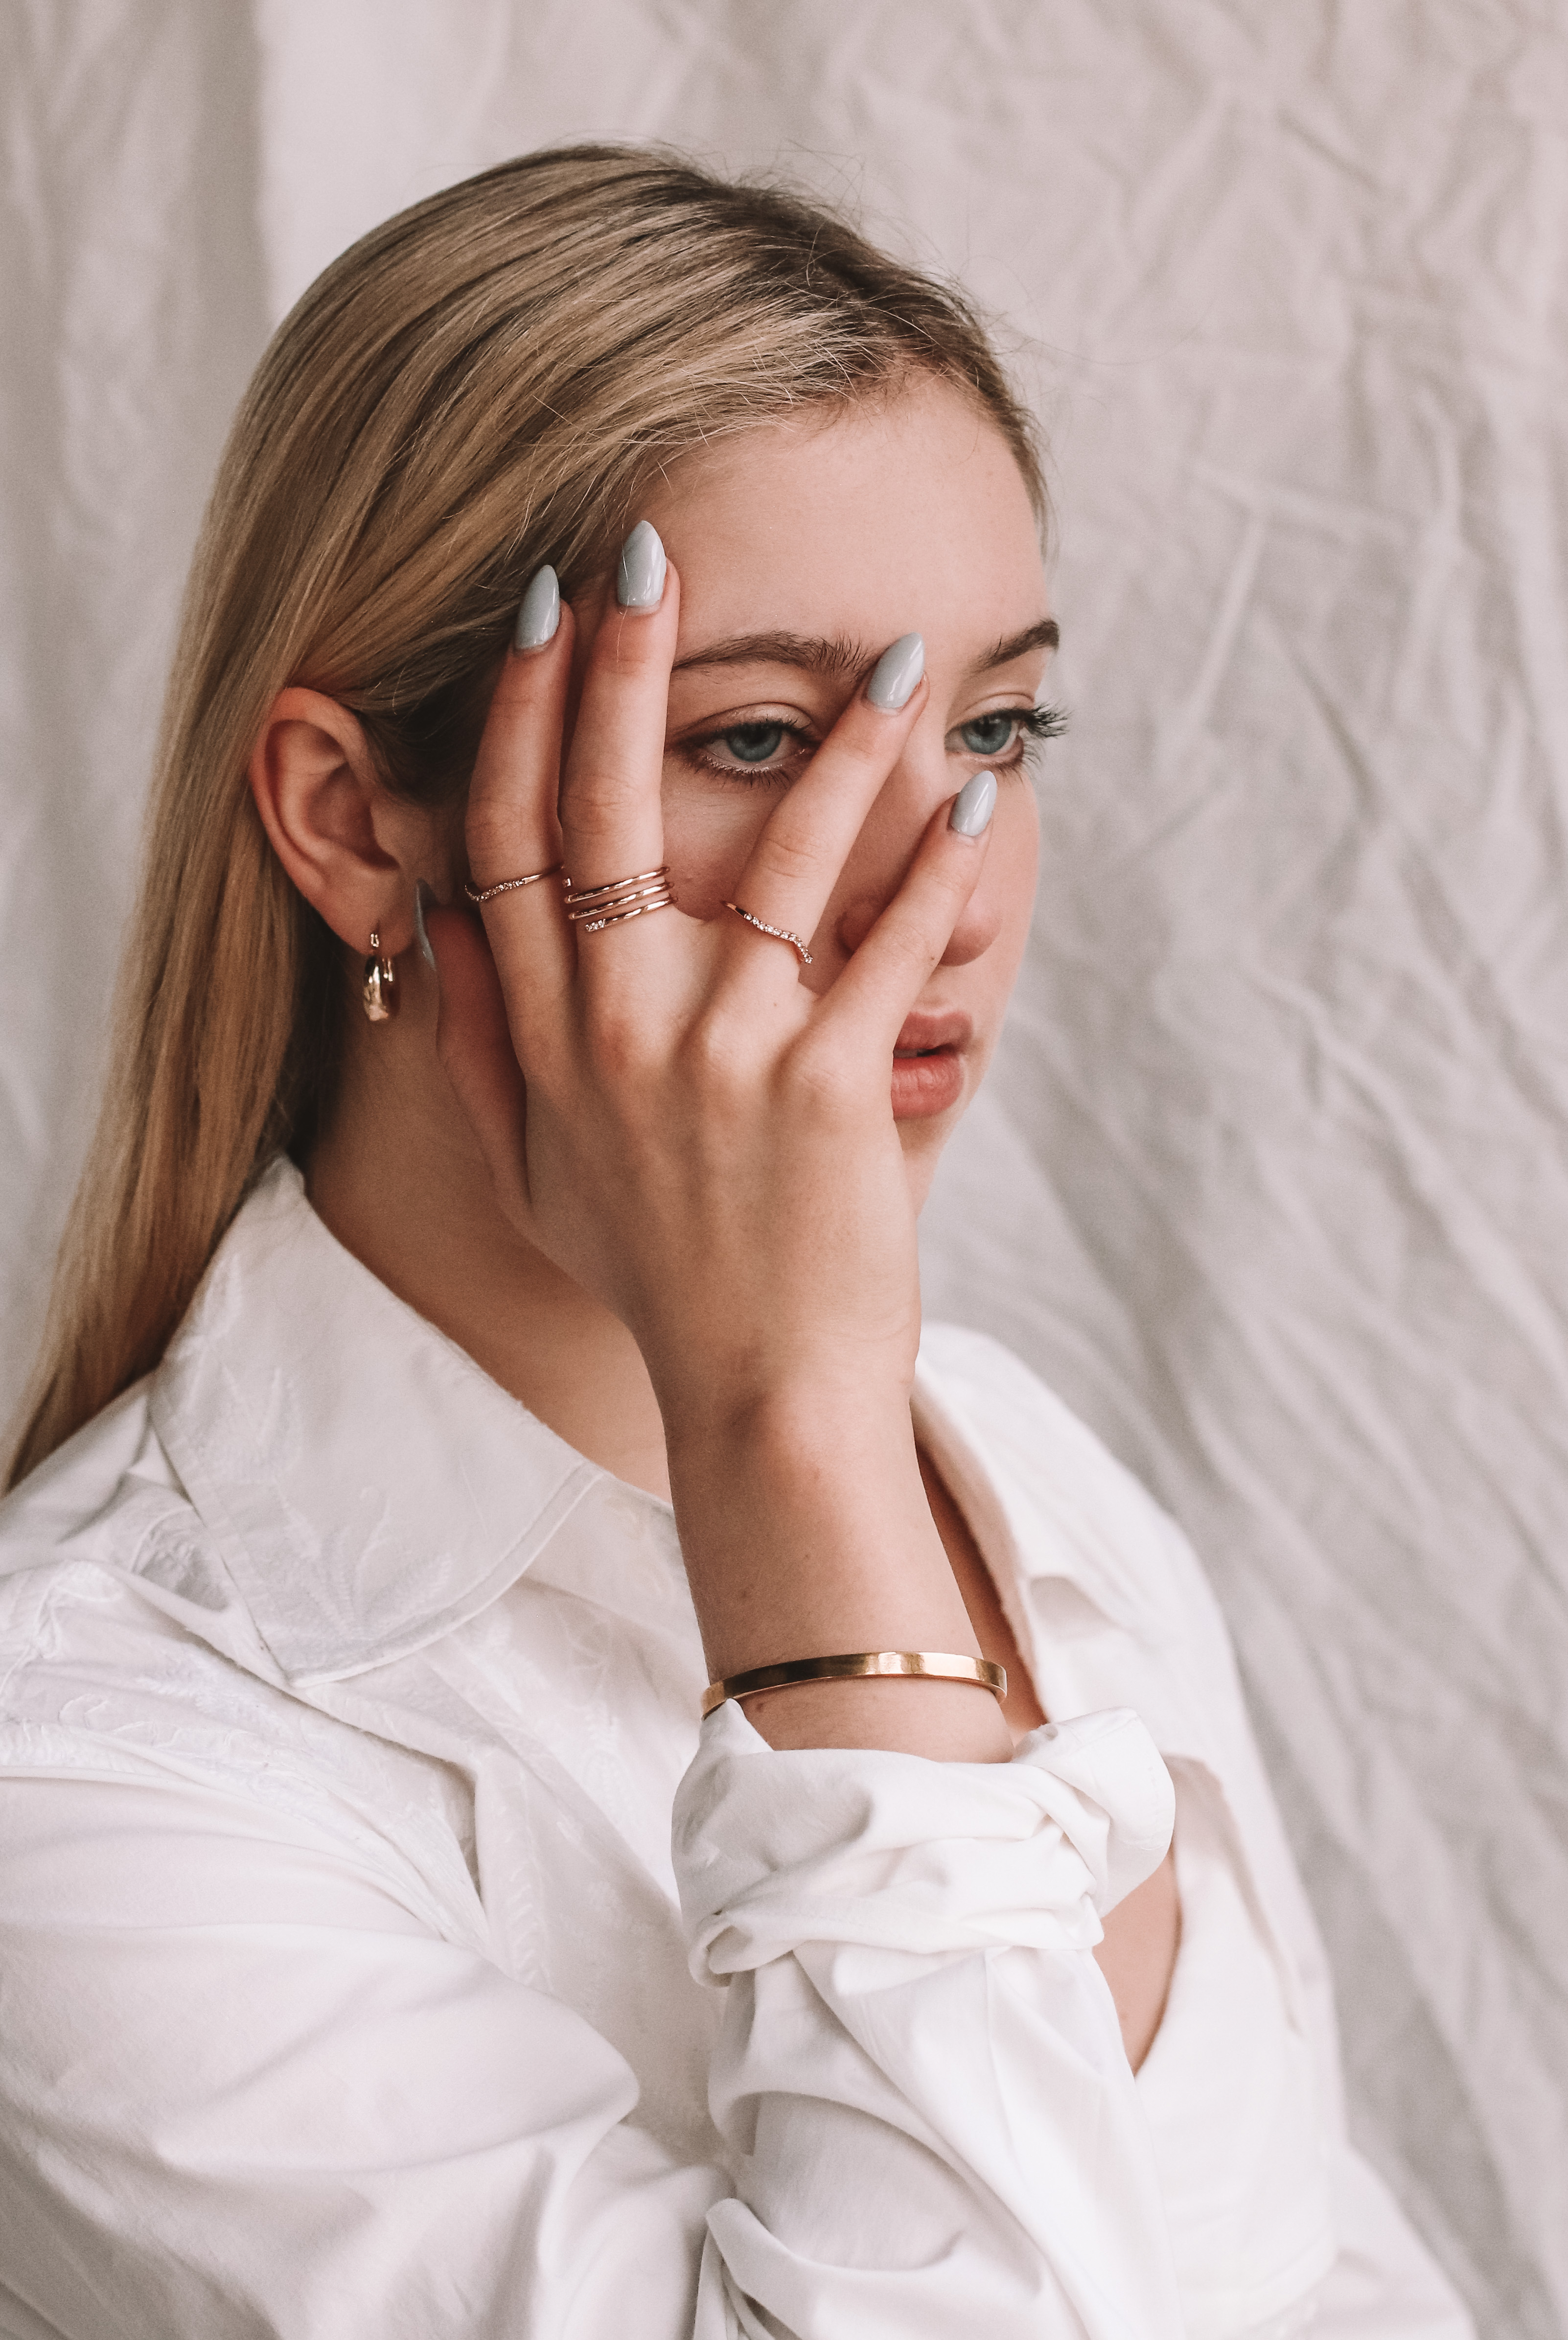 editorial photo of a girl with blonde hair wearing a white button-down and gold jewelry framing her face with her hands